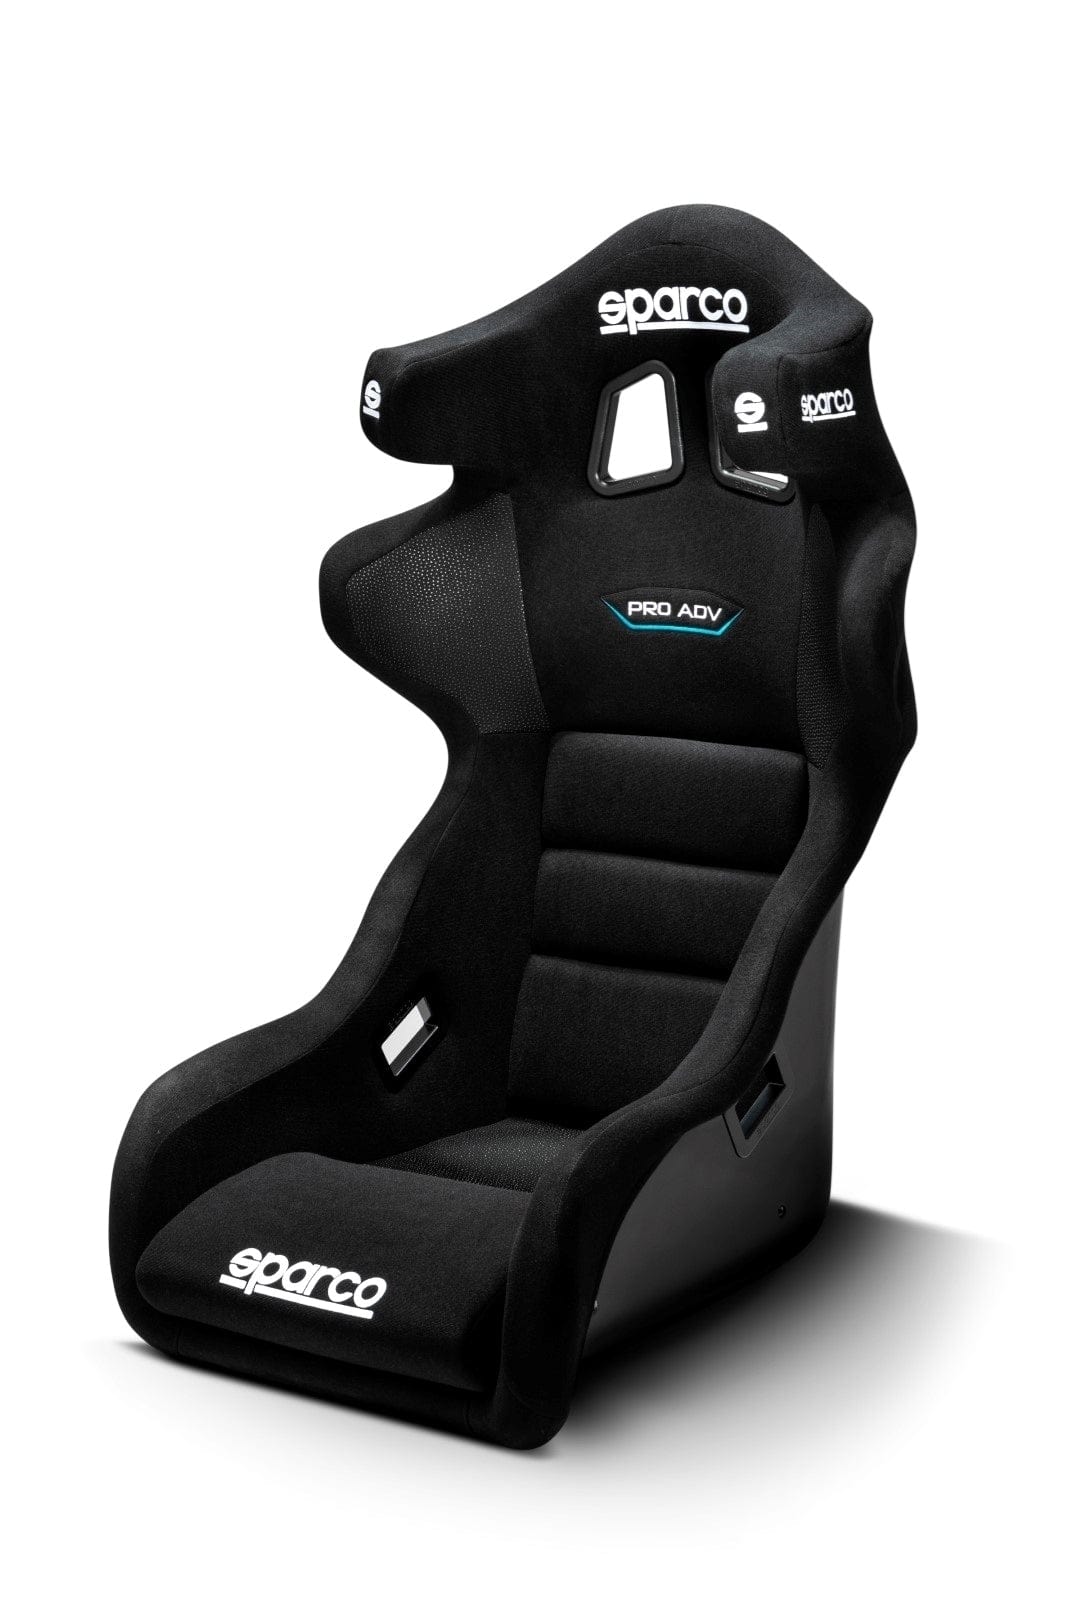 Sparco Pro-ADV Competition Seat Black - Universal - Dirty Racing Products